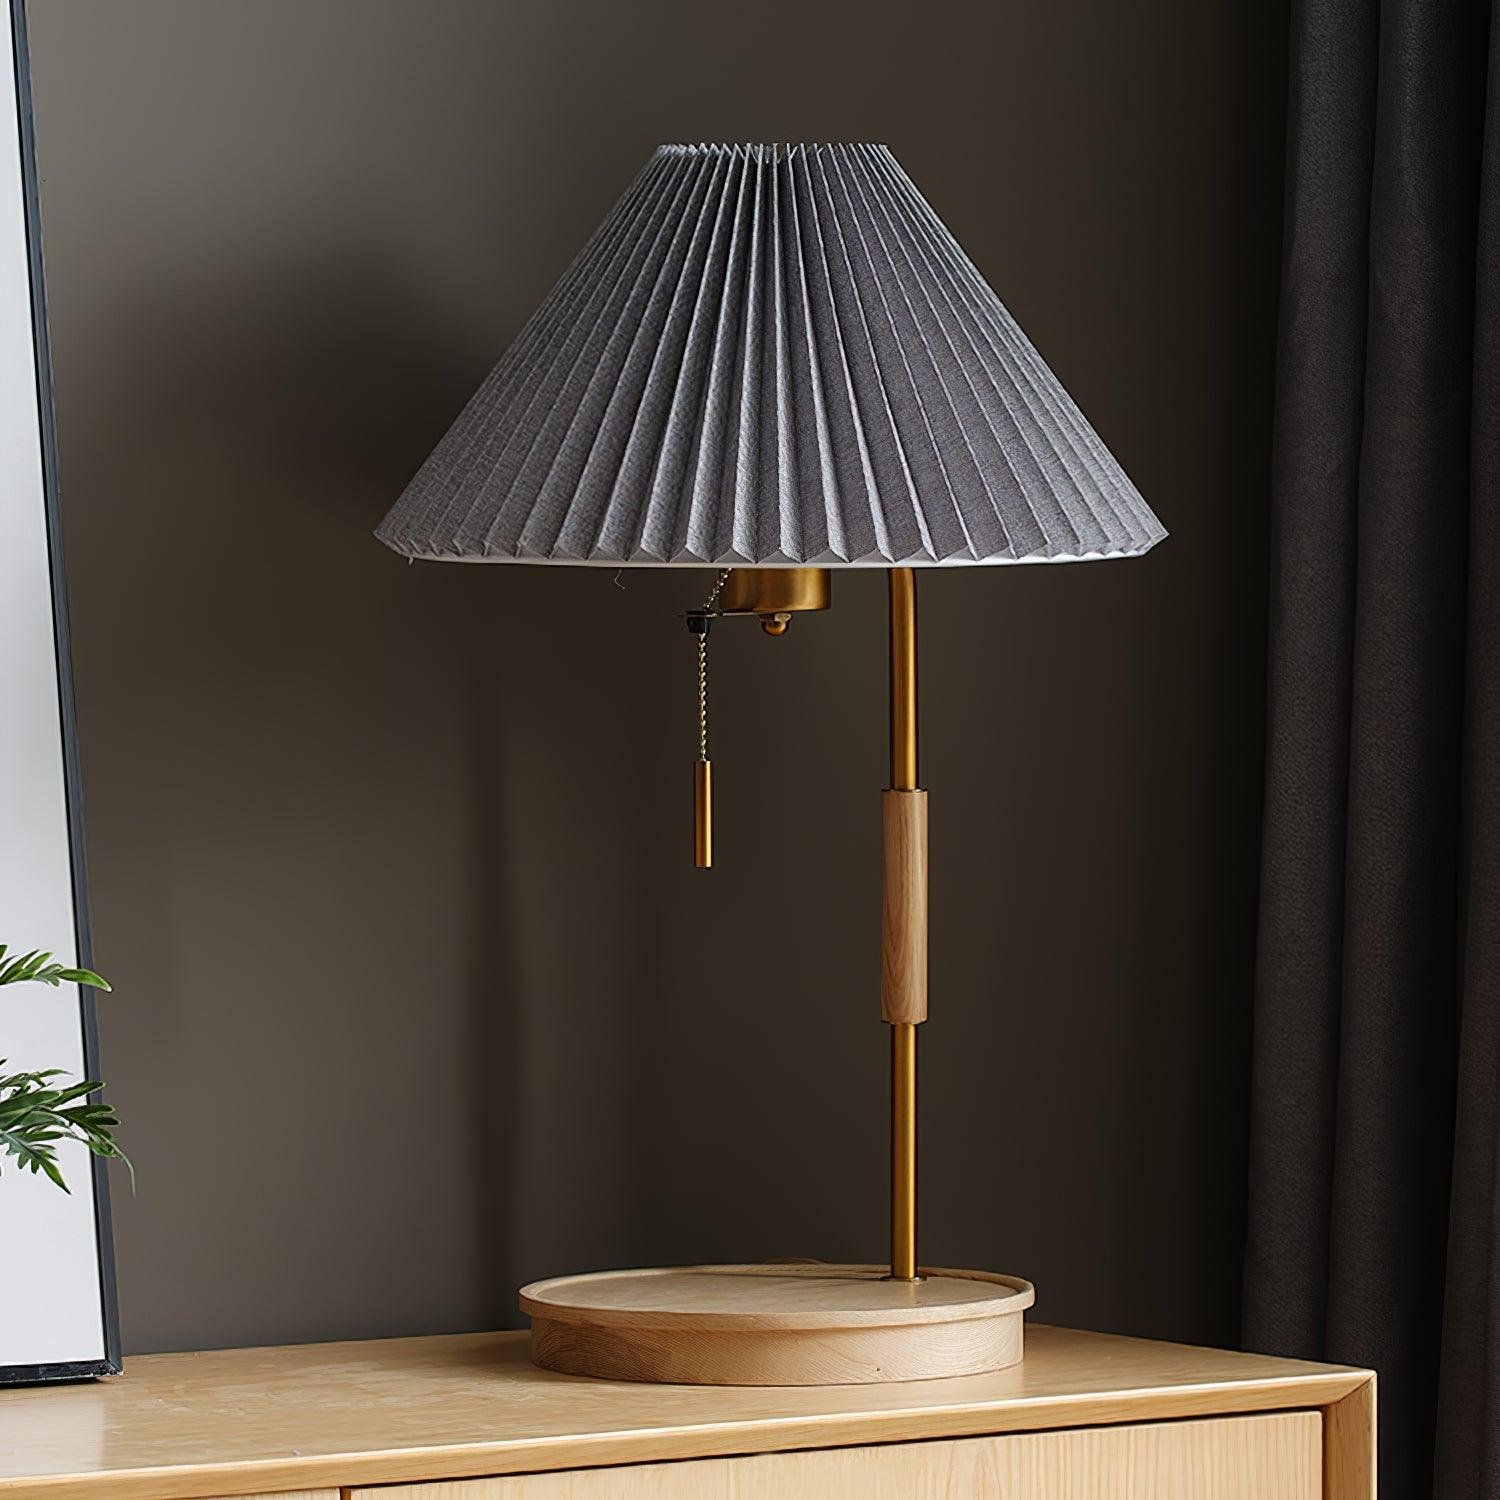 Wooden Retro Table Lamp in Wood color+Grey, US Plug, with a diameter of 12.2 inches and height of 20.4 inches (31cm x 52cm).